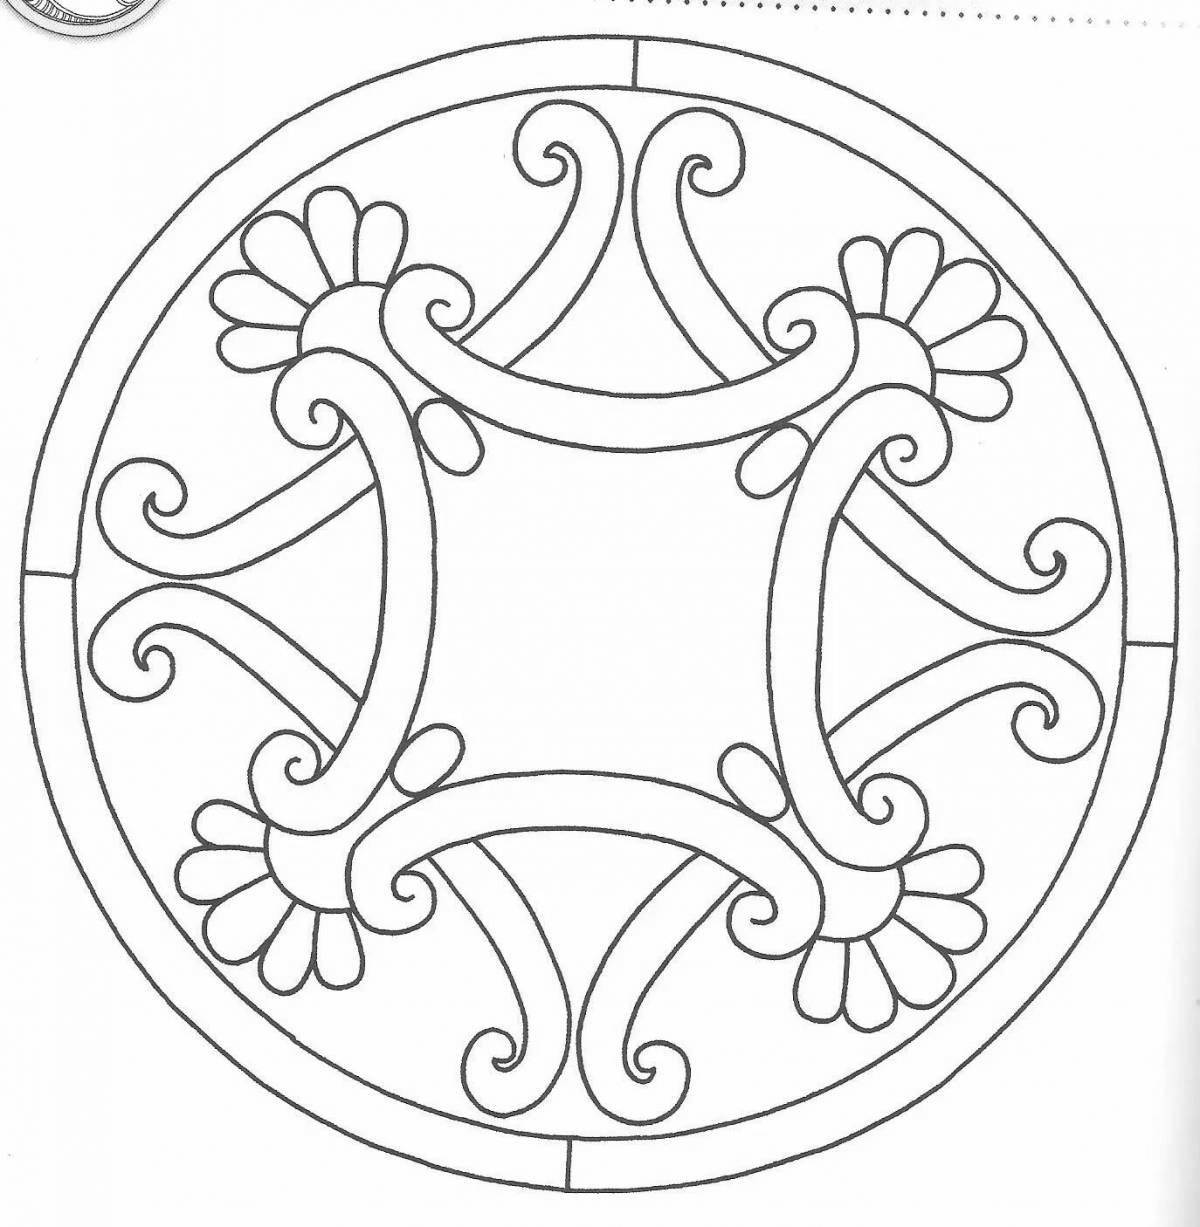 Color-rich tiles for coloring pages